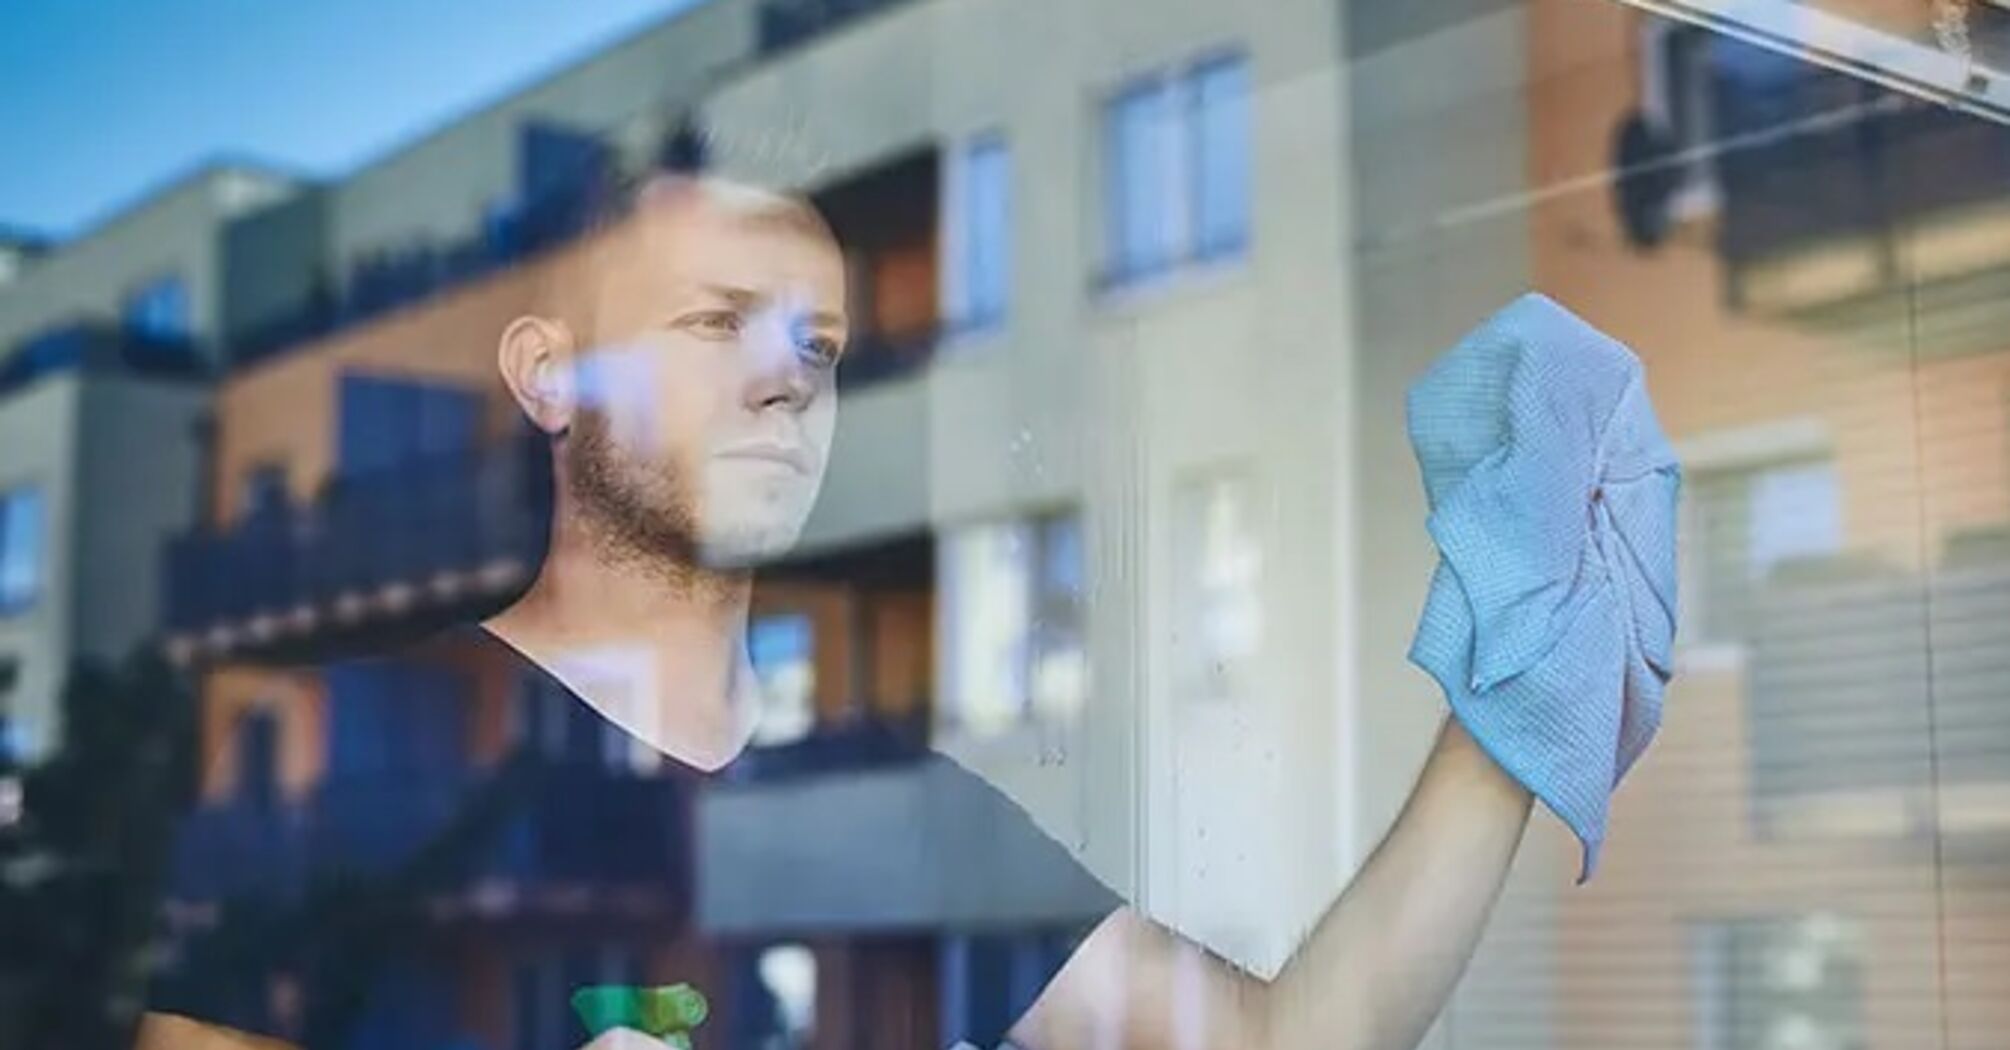 Windows will never be perfectly clean: common mistakes when cleaning glass